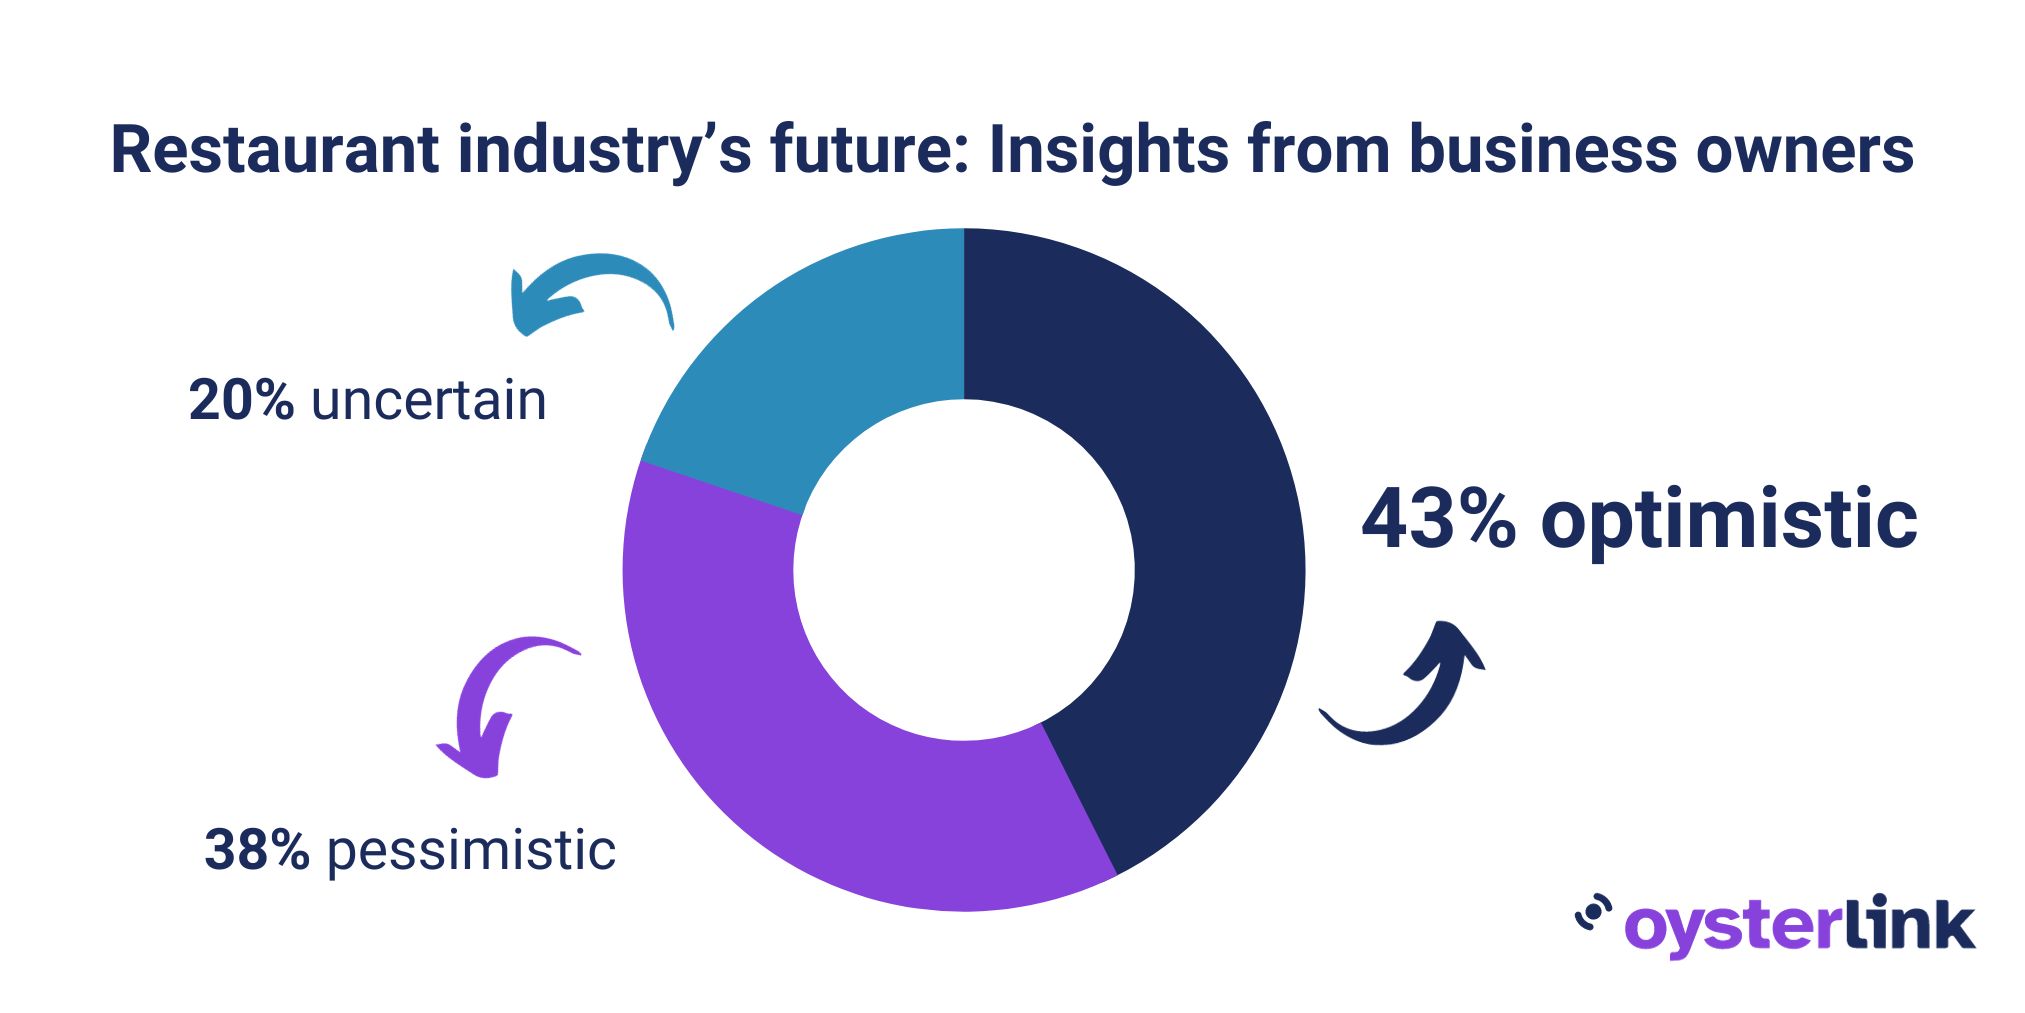 A survey on restaurant owners regarding the industry's future